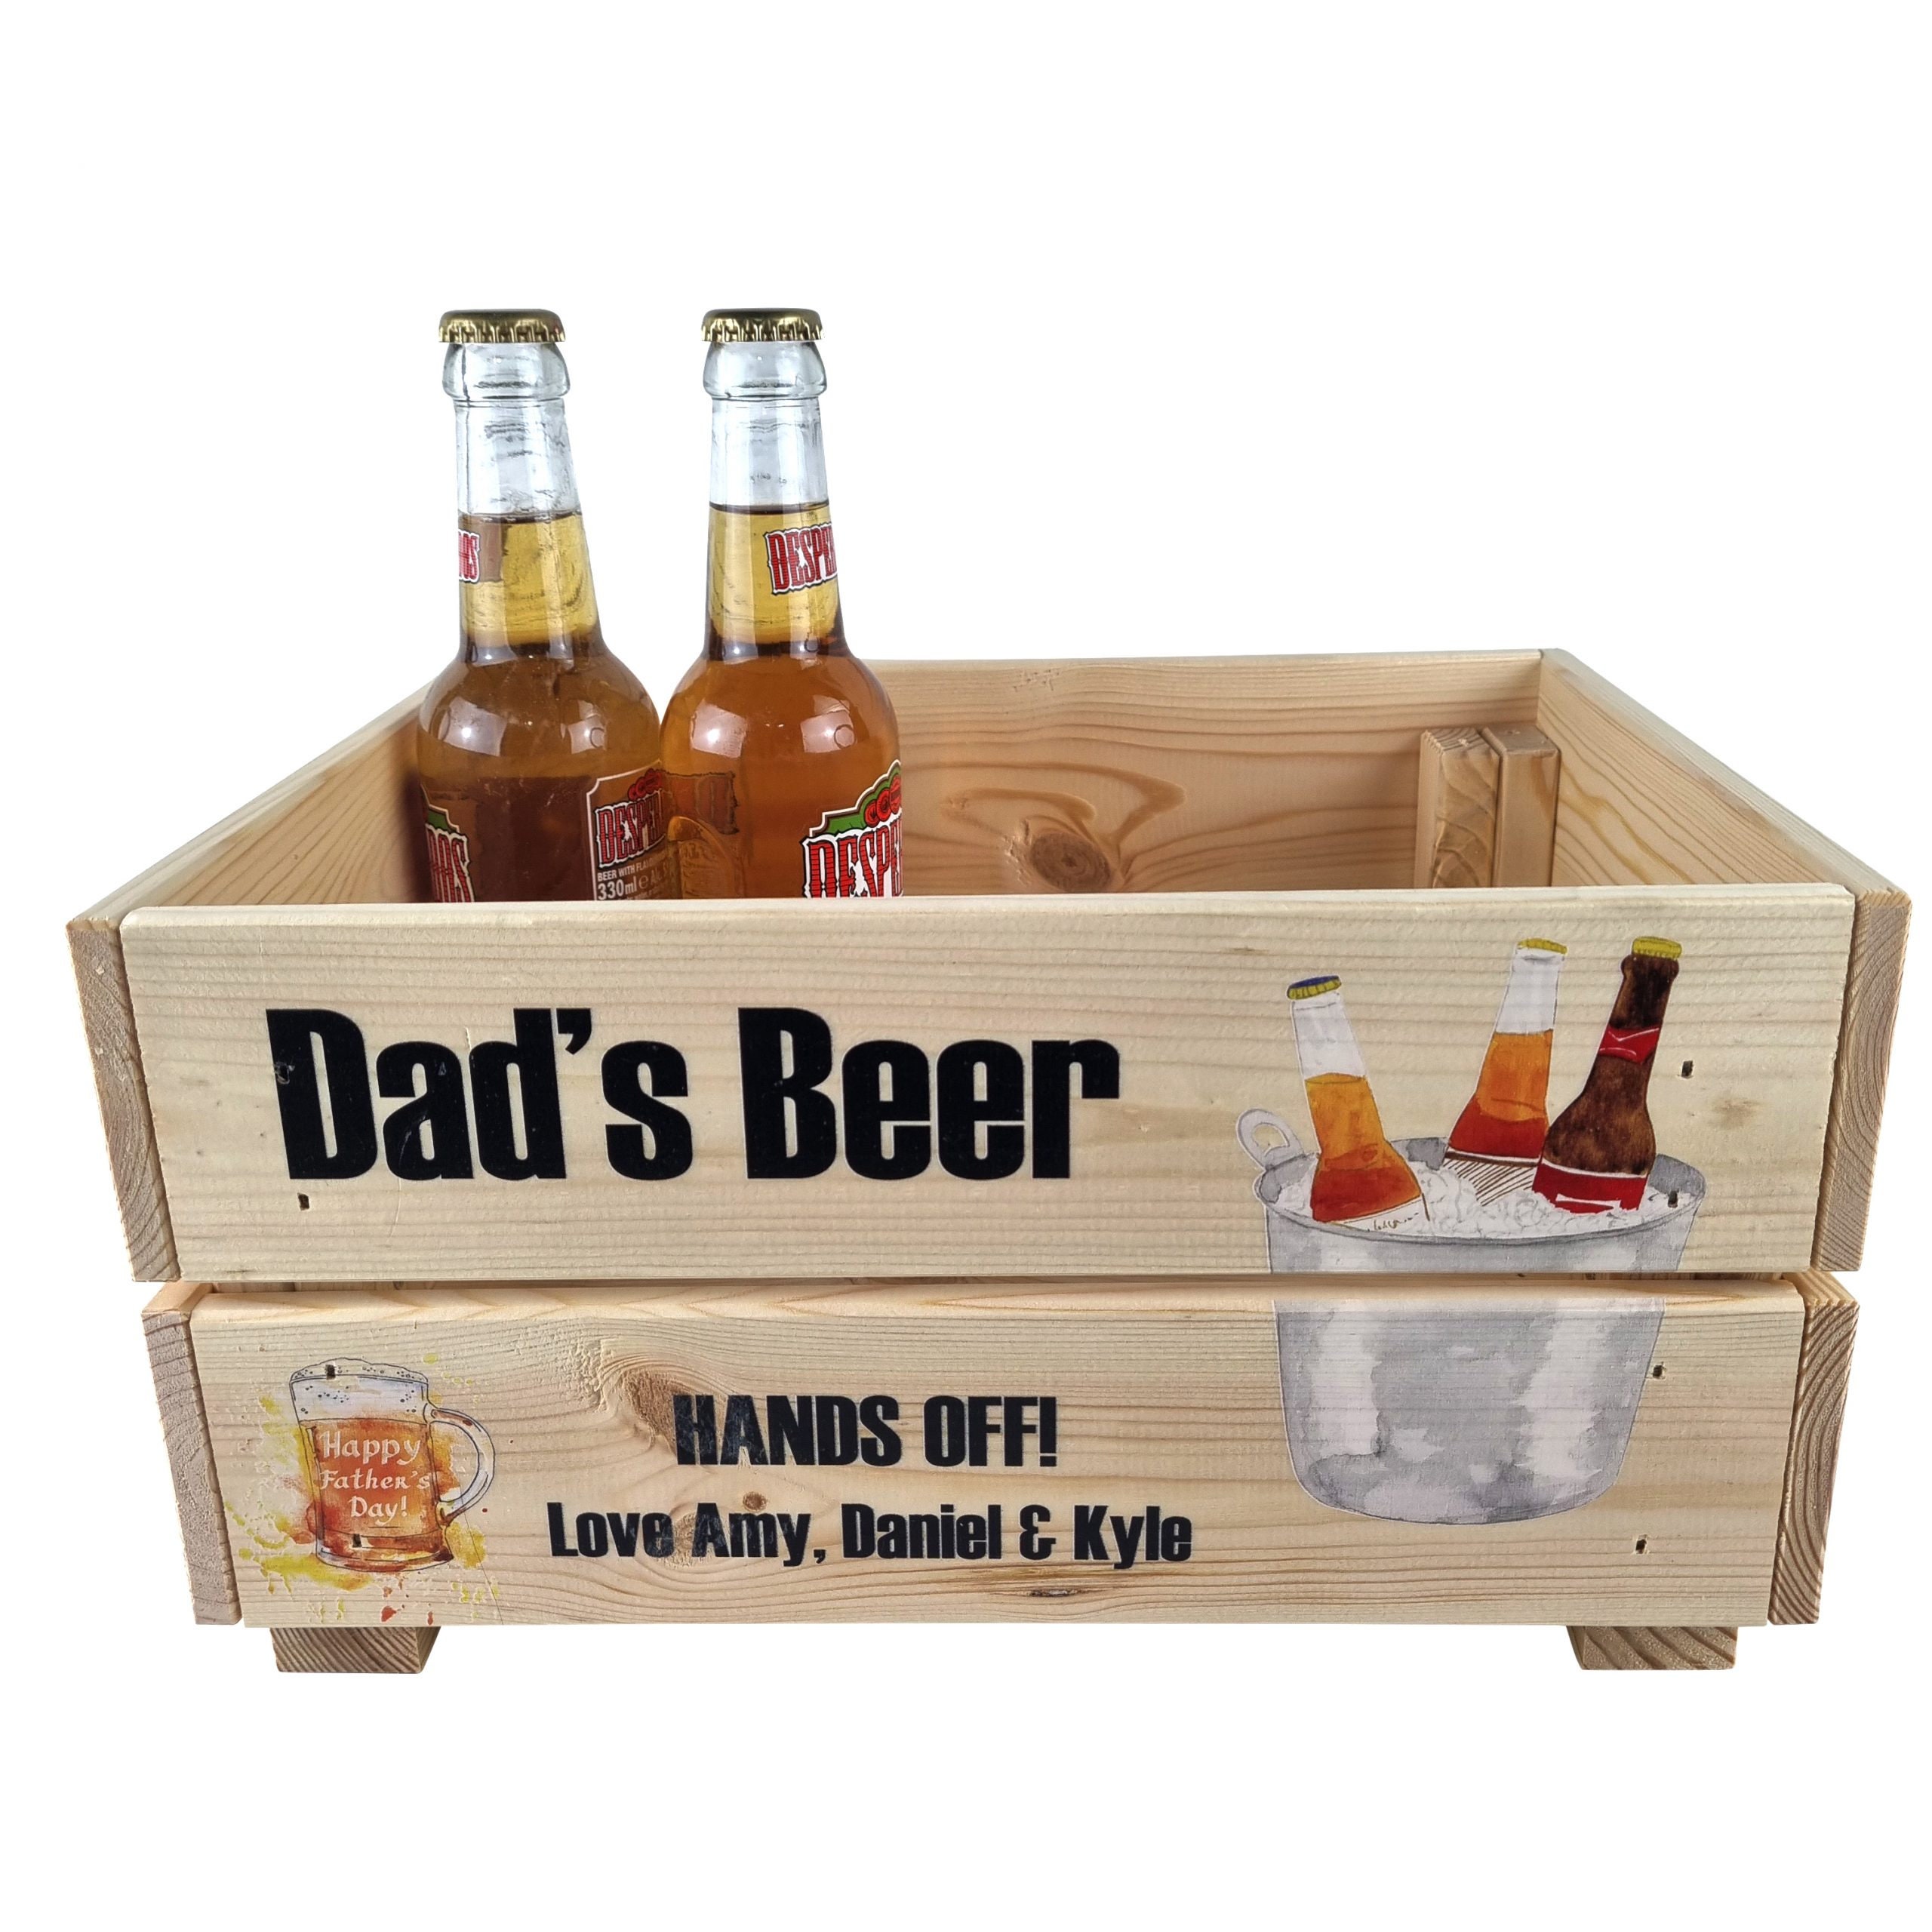 Funny Dad Gift, beer gifts for dad, beer bottle opener, fathers day gift  from kids, first fathers day gift from baby girl boy new dad